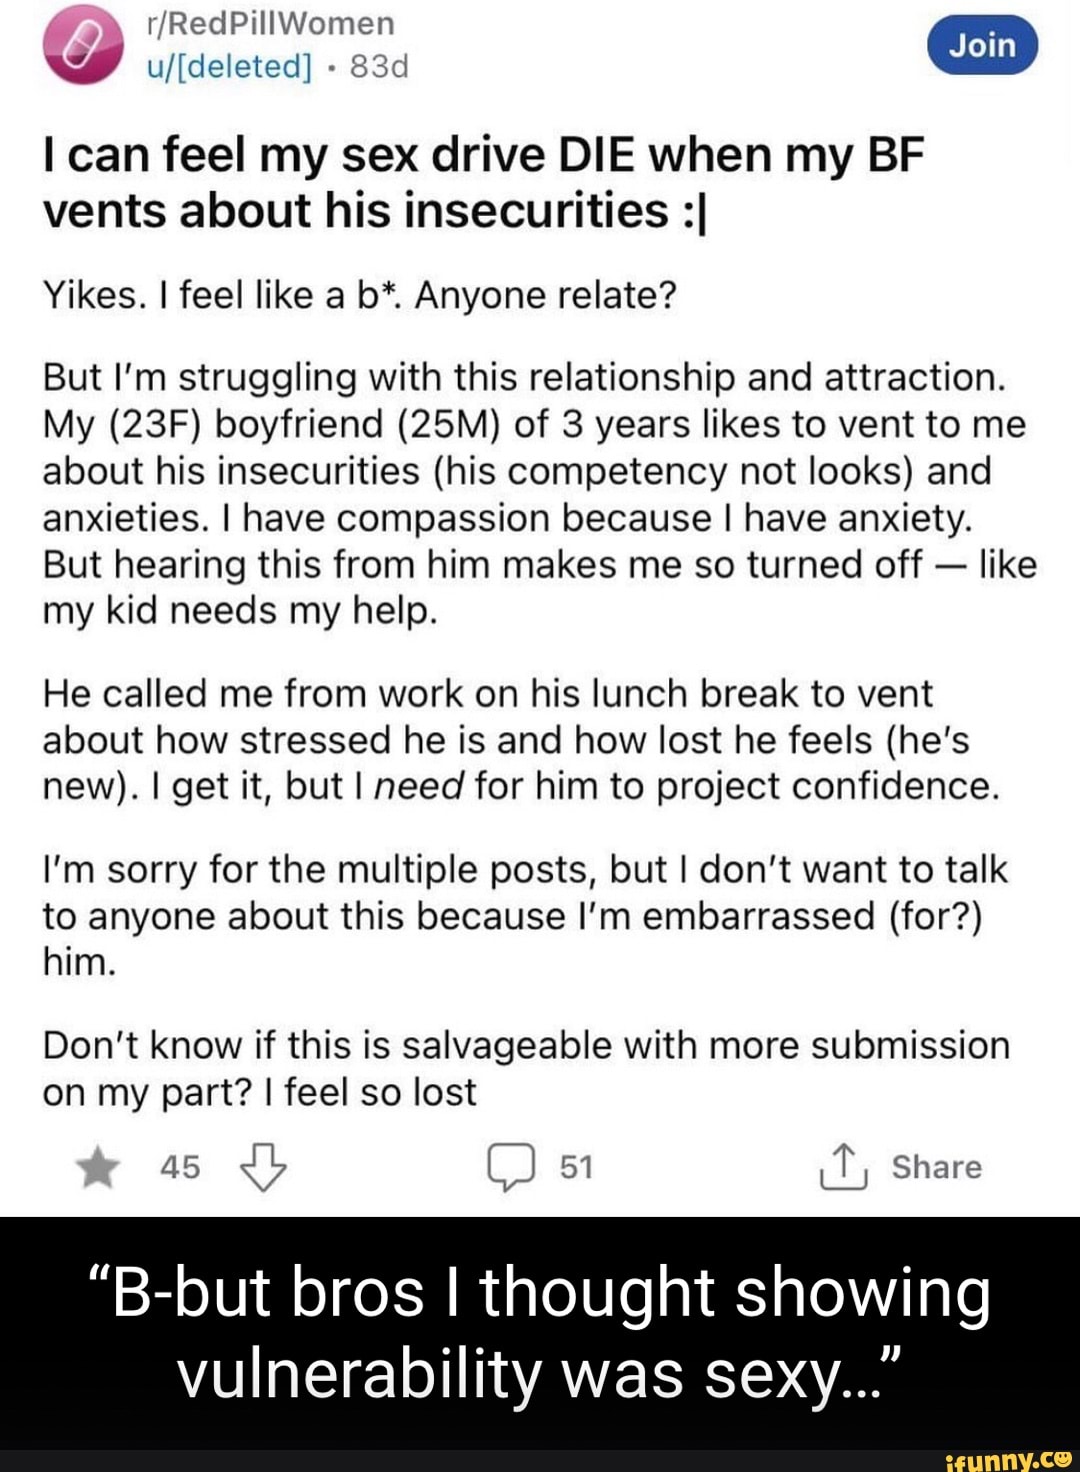 RedPillWomen can feel my sex drive DIE when my BF vents about his insecurities I Yikes.